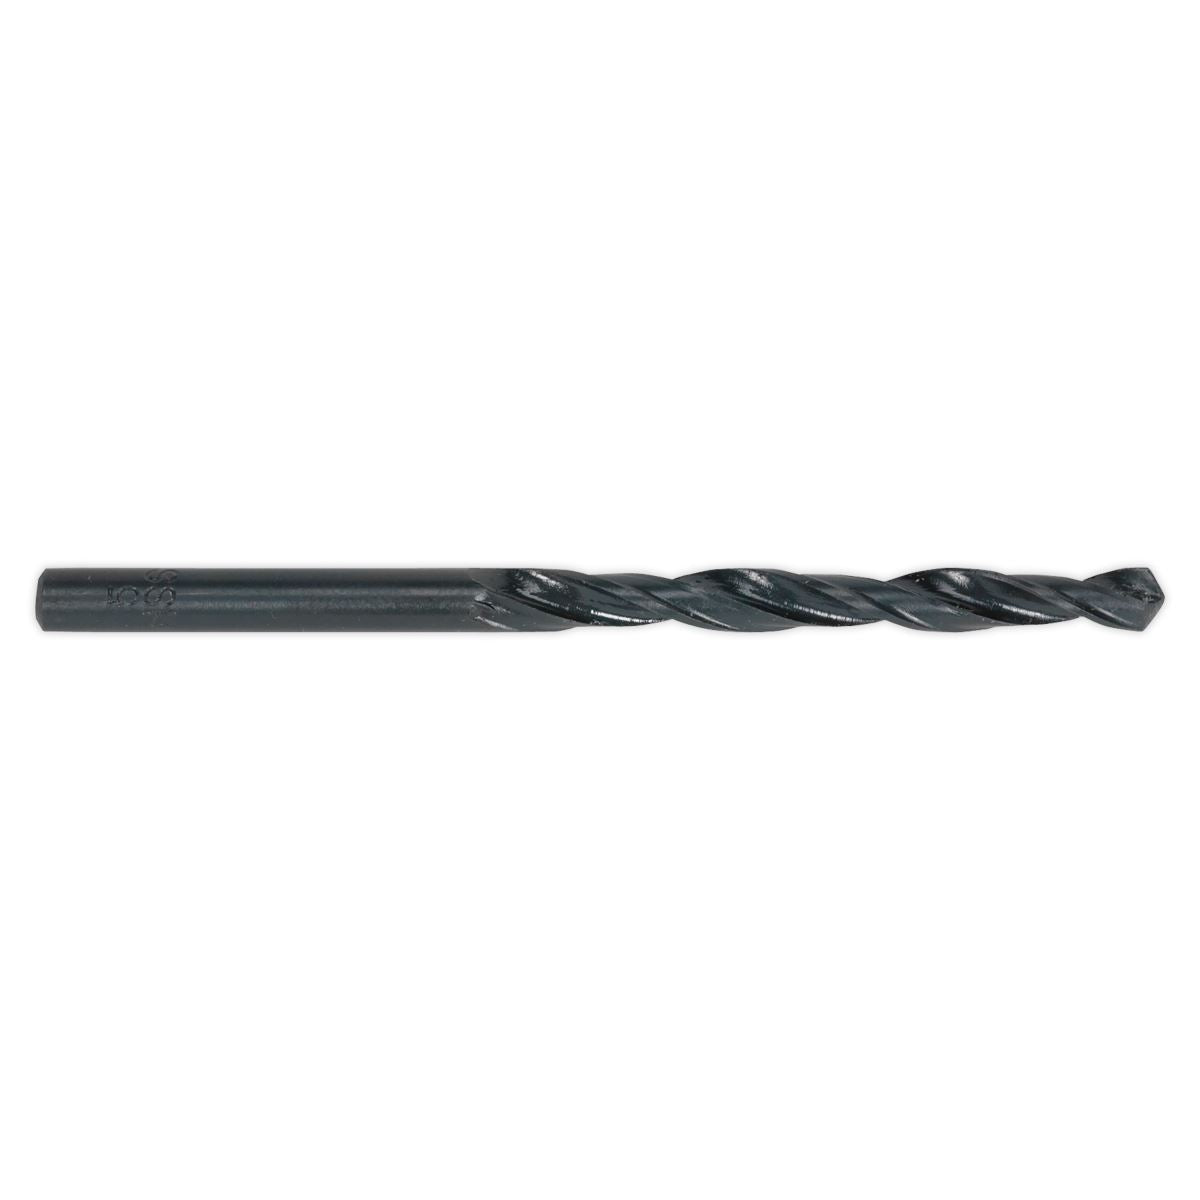 Sealey HSS Roll Forged Drill Bit 1/8" Pack of 10 DBI18RF